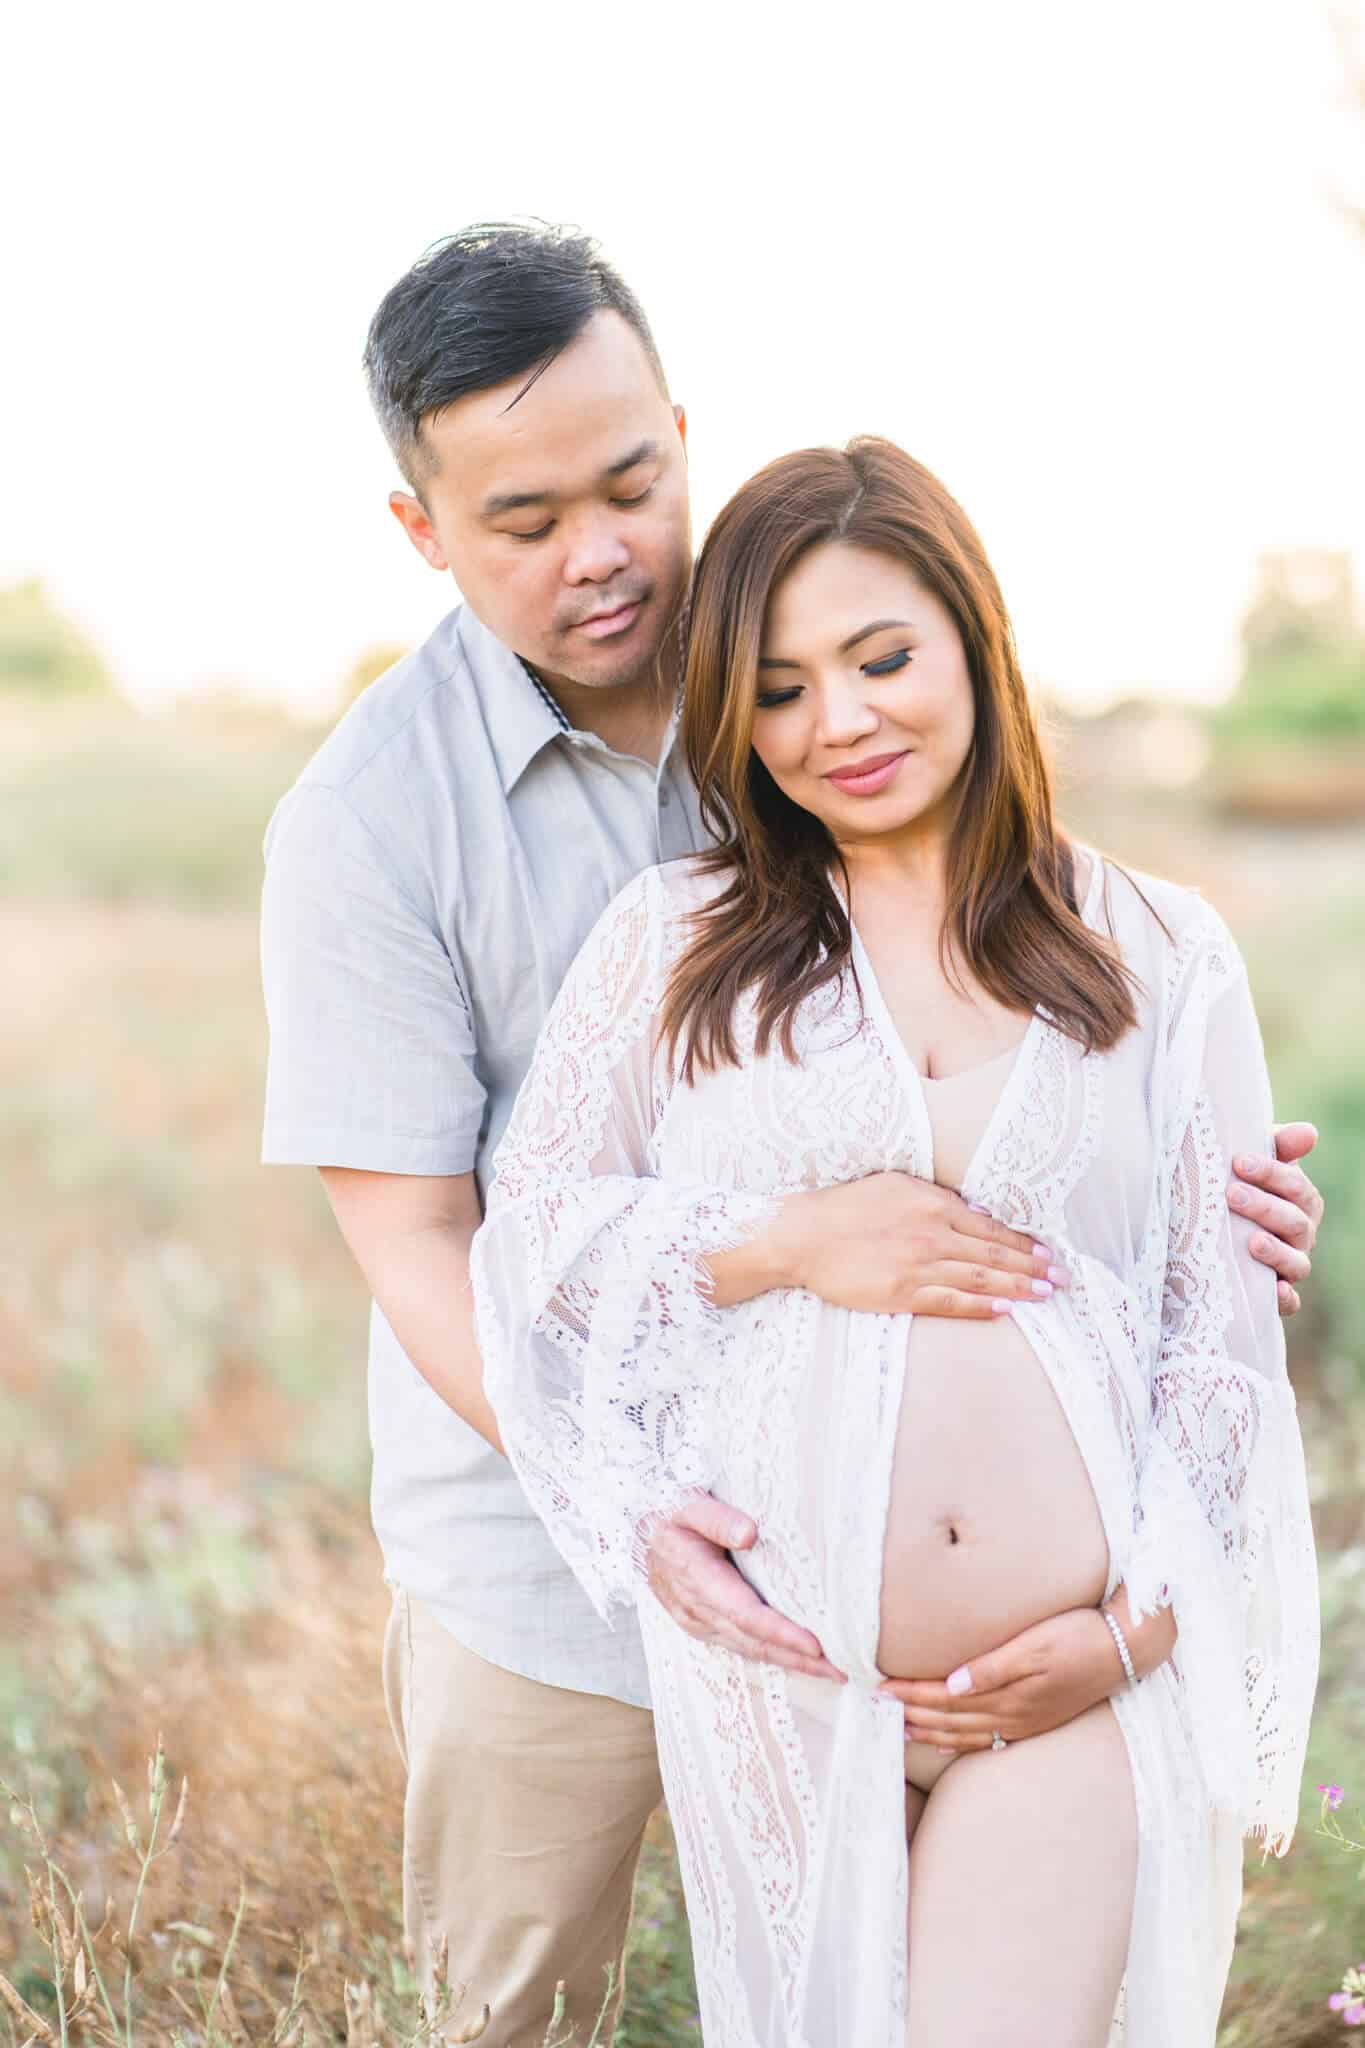 Pregnant mom holding her bare belly in a white dress outdoors in a field with dad standing and hugging her from behind. Orange Coast Women's Medical Group